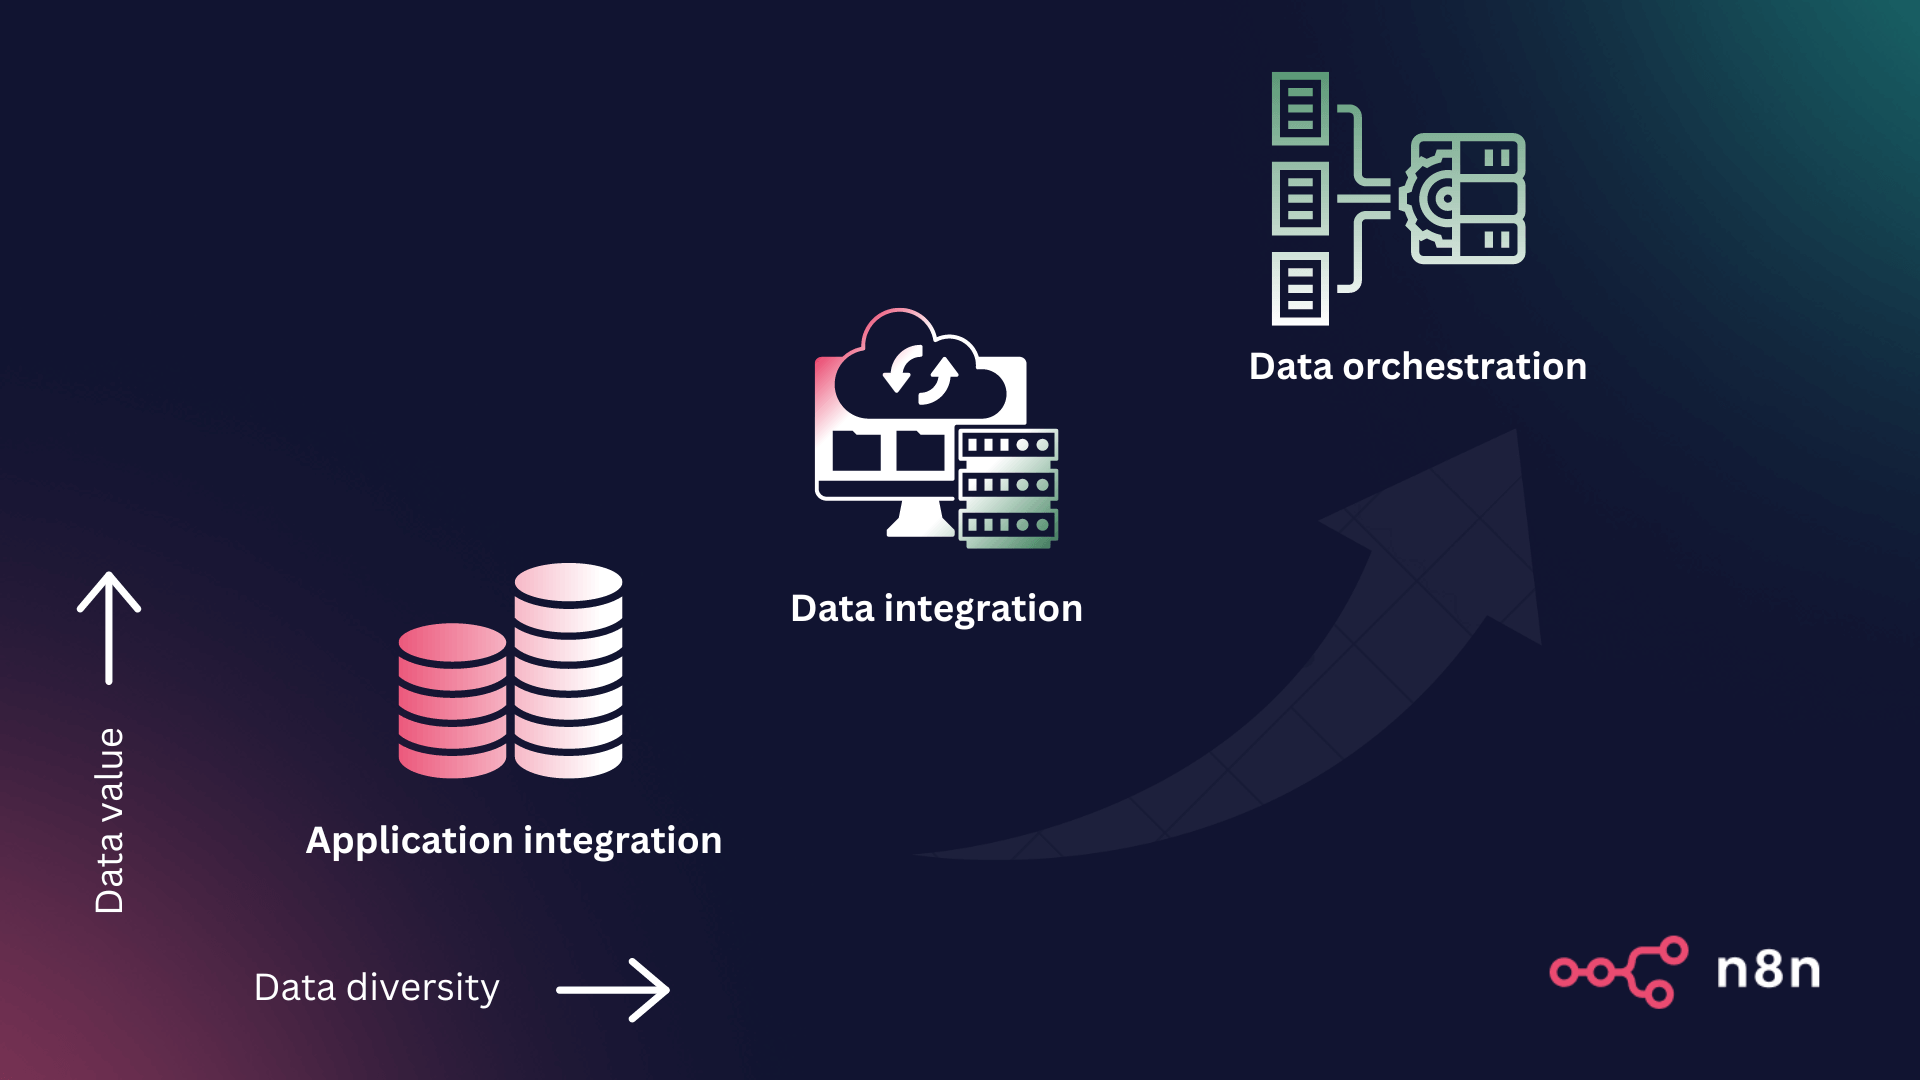 Top 10 data orchestration tools: a detailed roundup